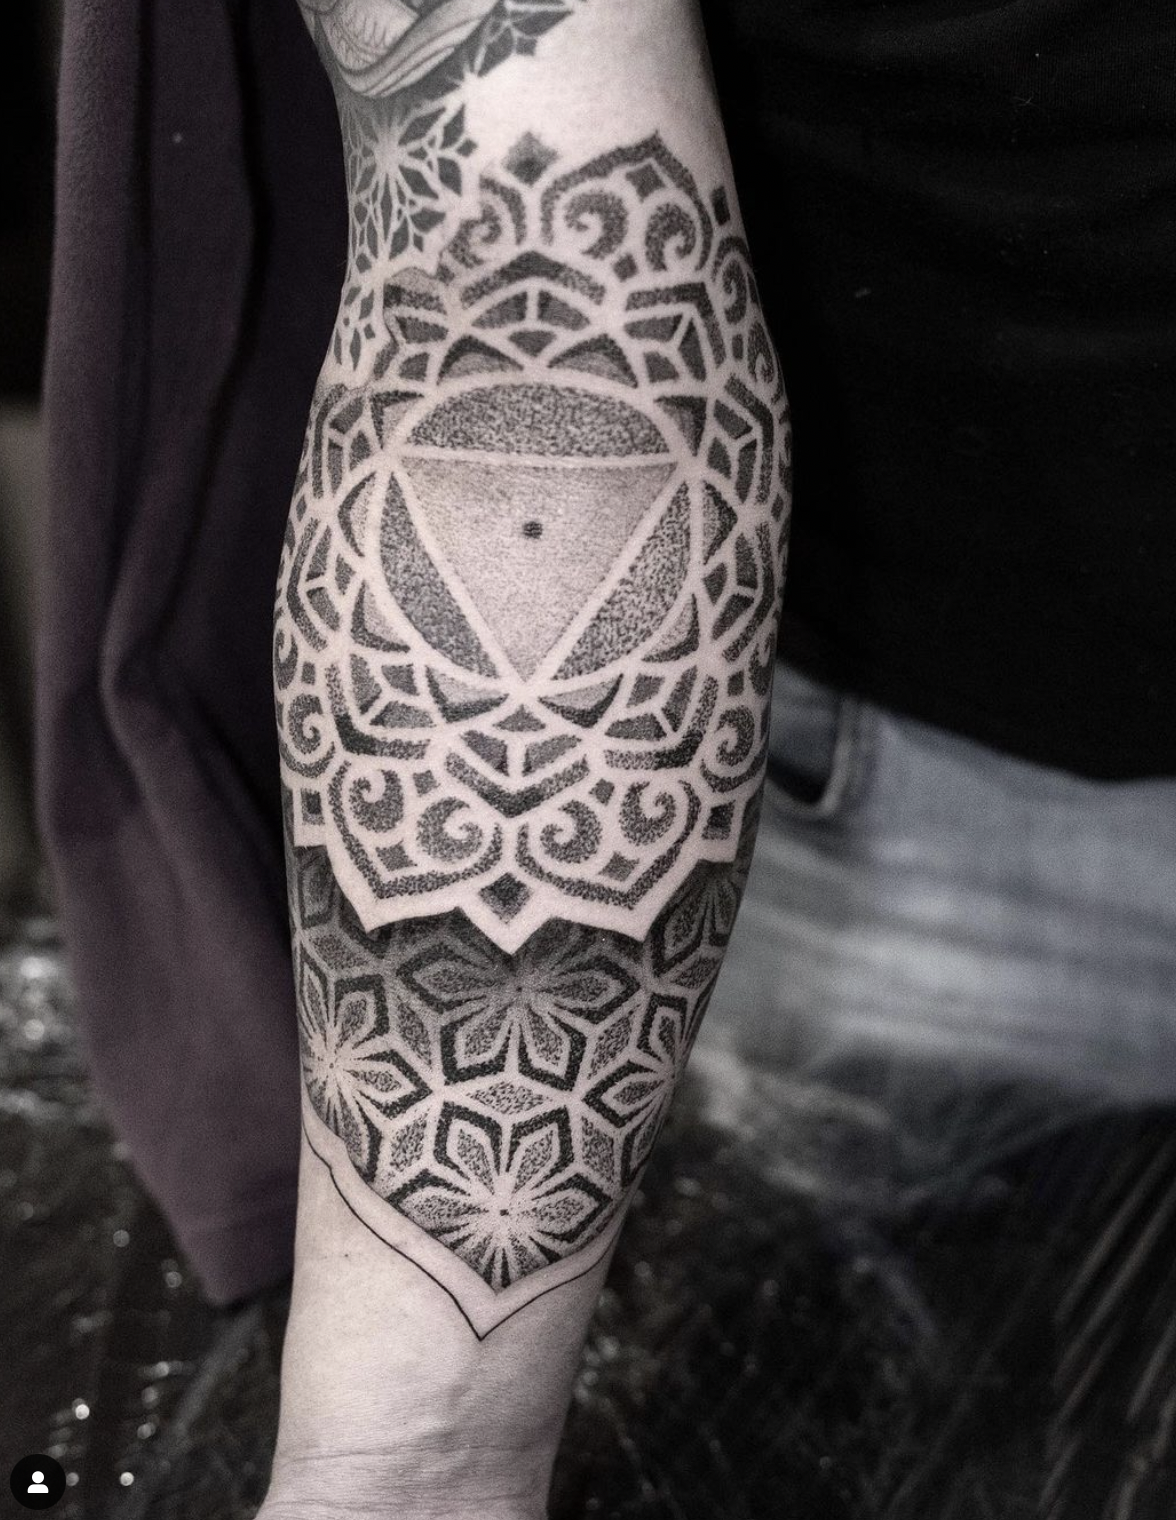 I Got A Full Geometric Tattoo Sleeve In 4 Days Follow me along the  journey from start to finish  YouTube